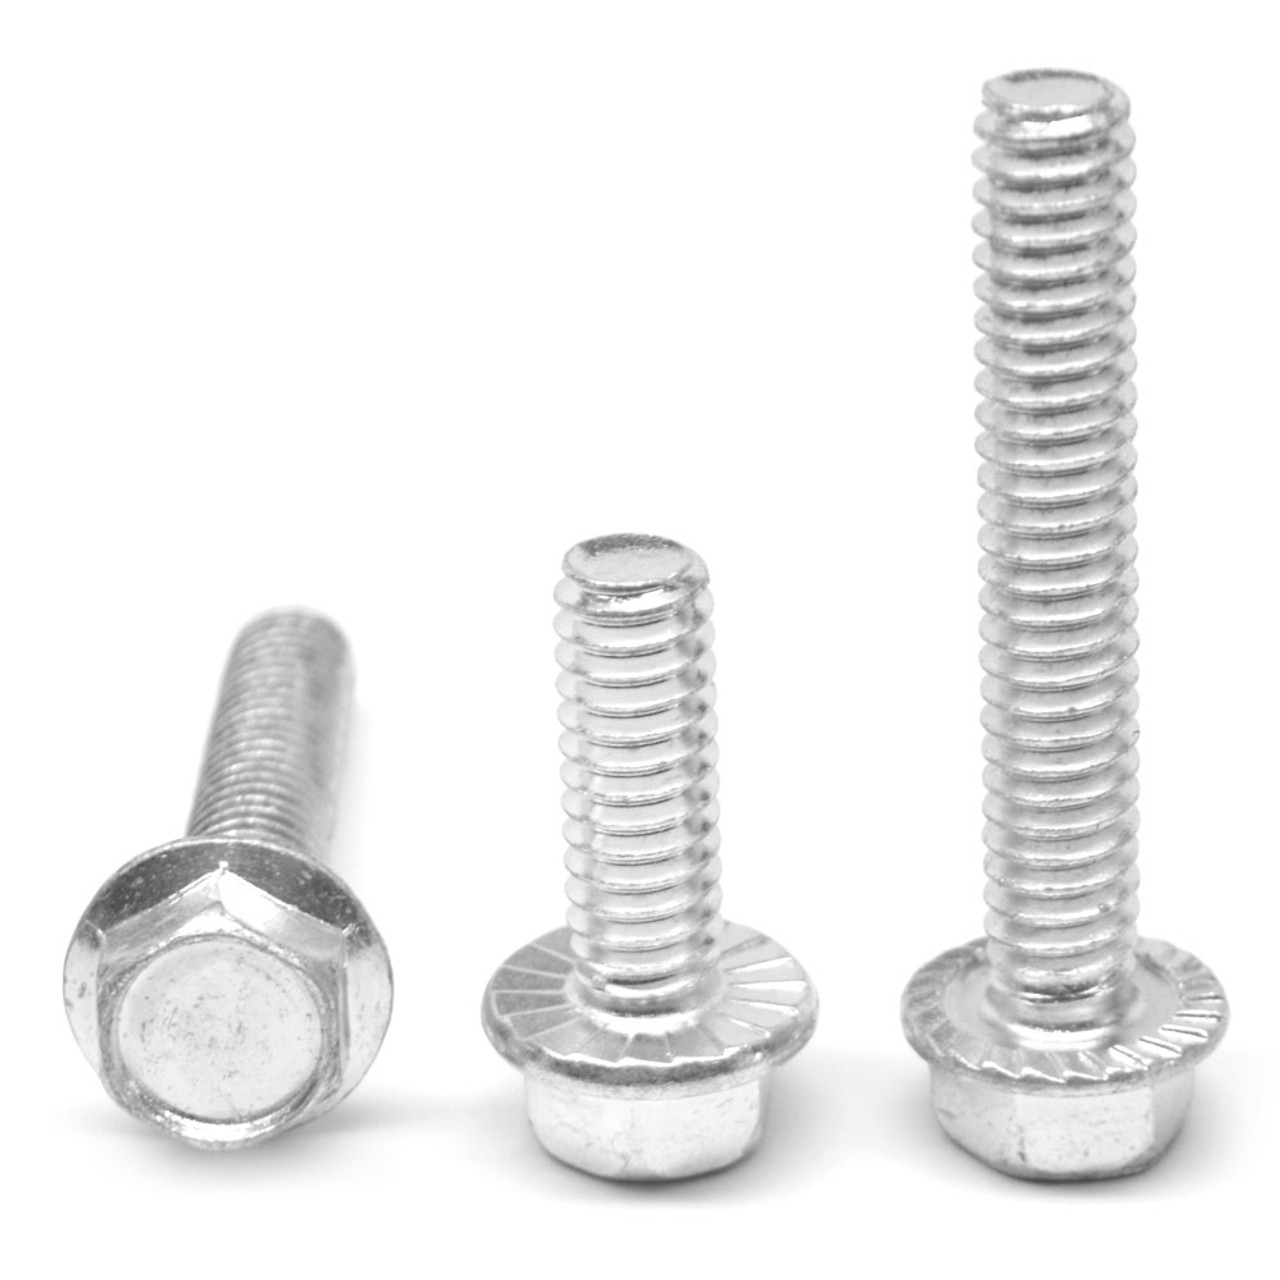 #10-32 x 1 1/4" (FT) Fine Thread Hex Flange Screw with Serration Case Hardened Low Carbon Steel Zinc Plated